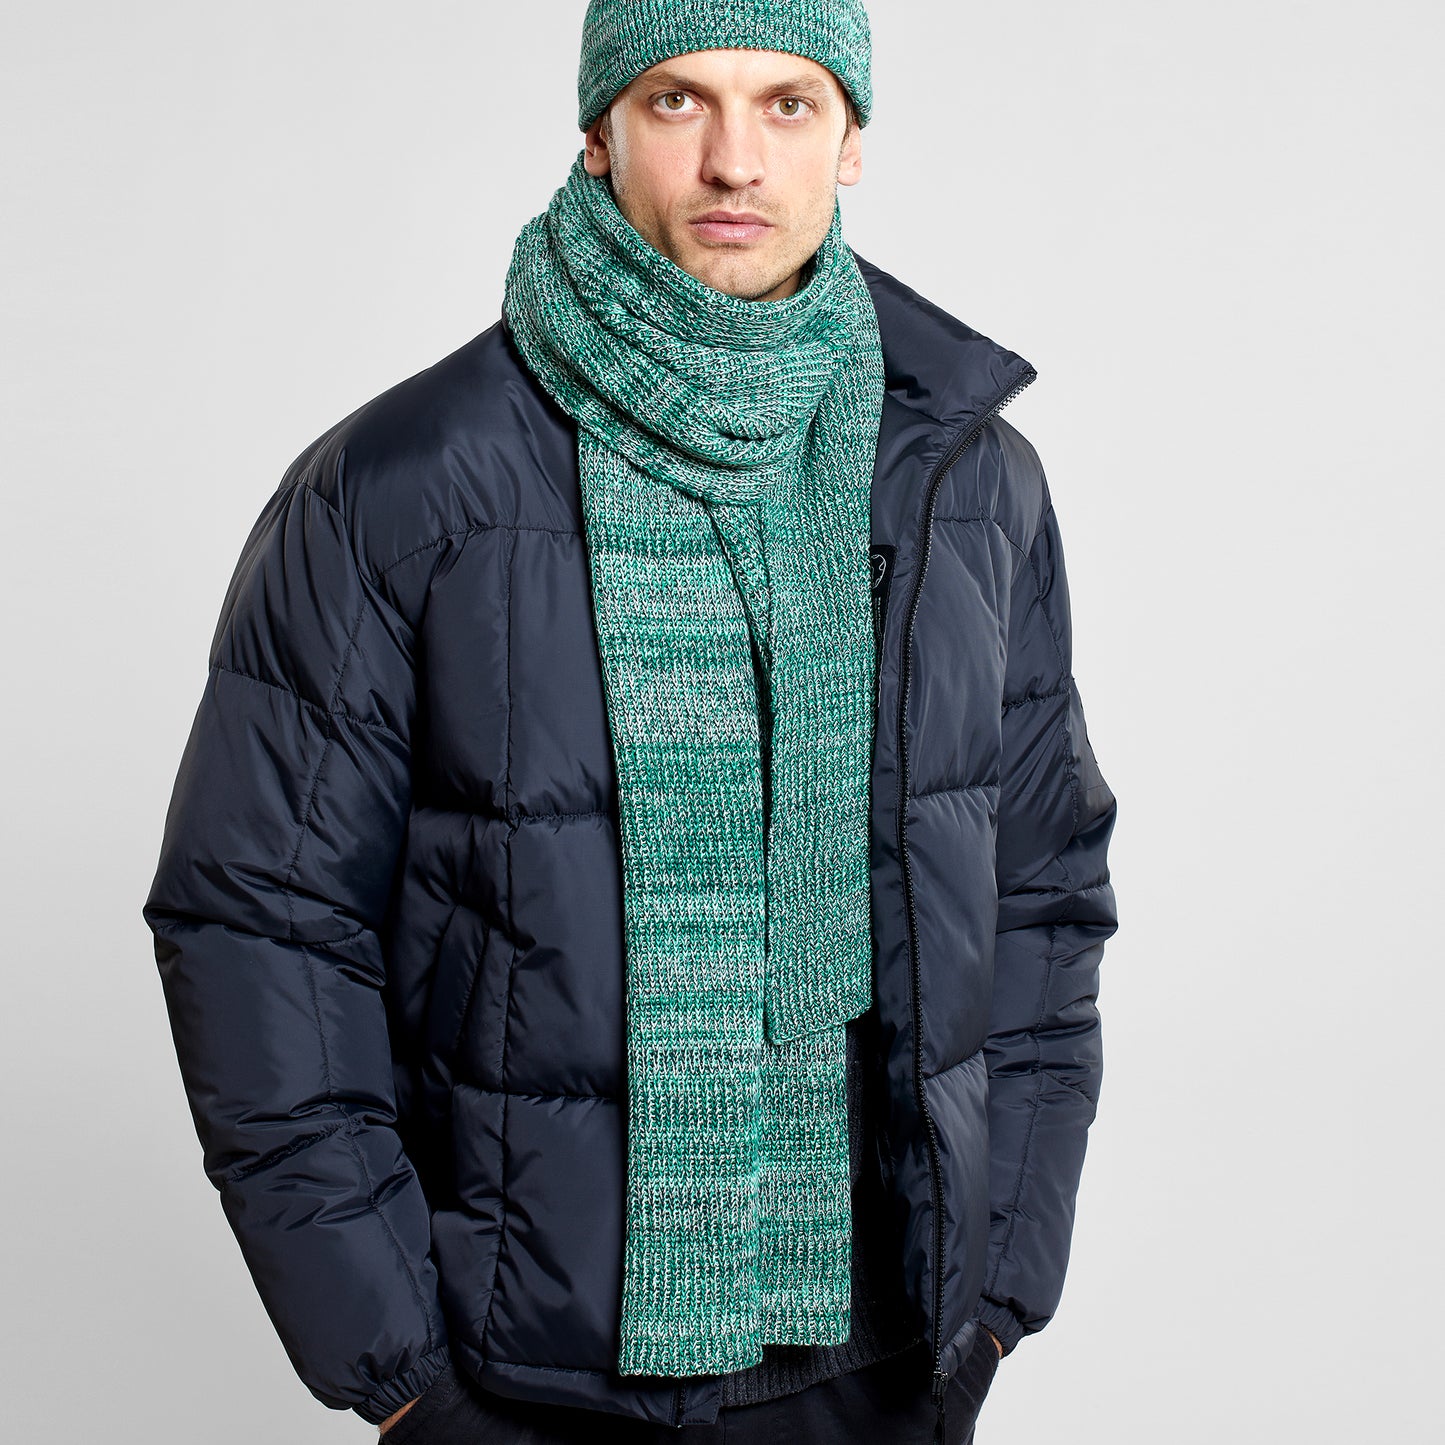 scarf norrfors, multi color green, unisex - dedicated